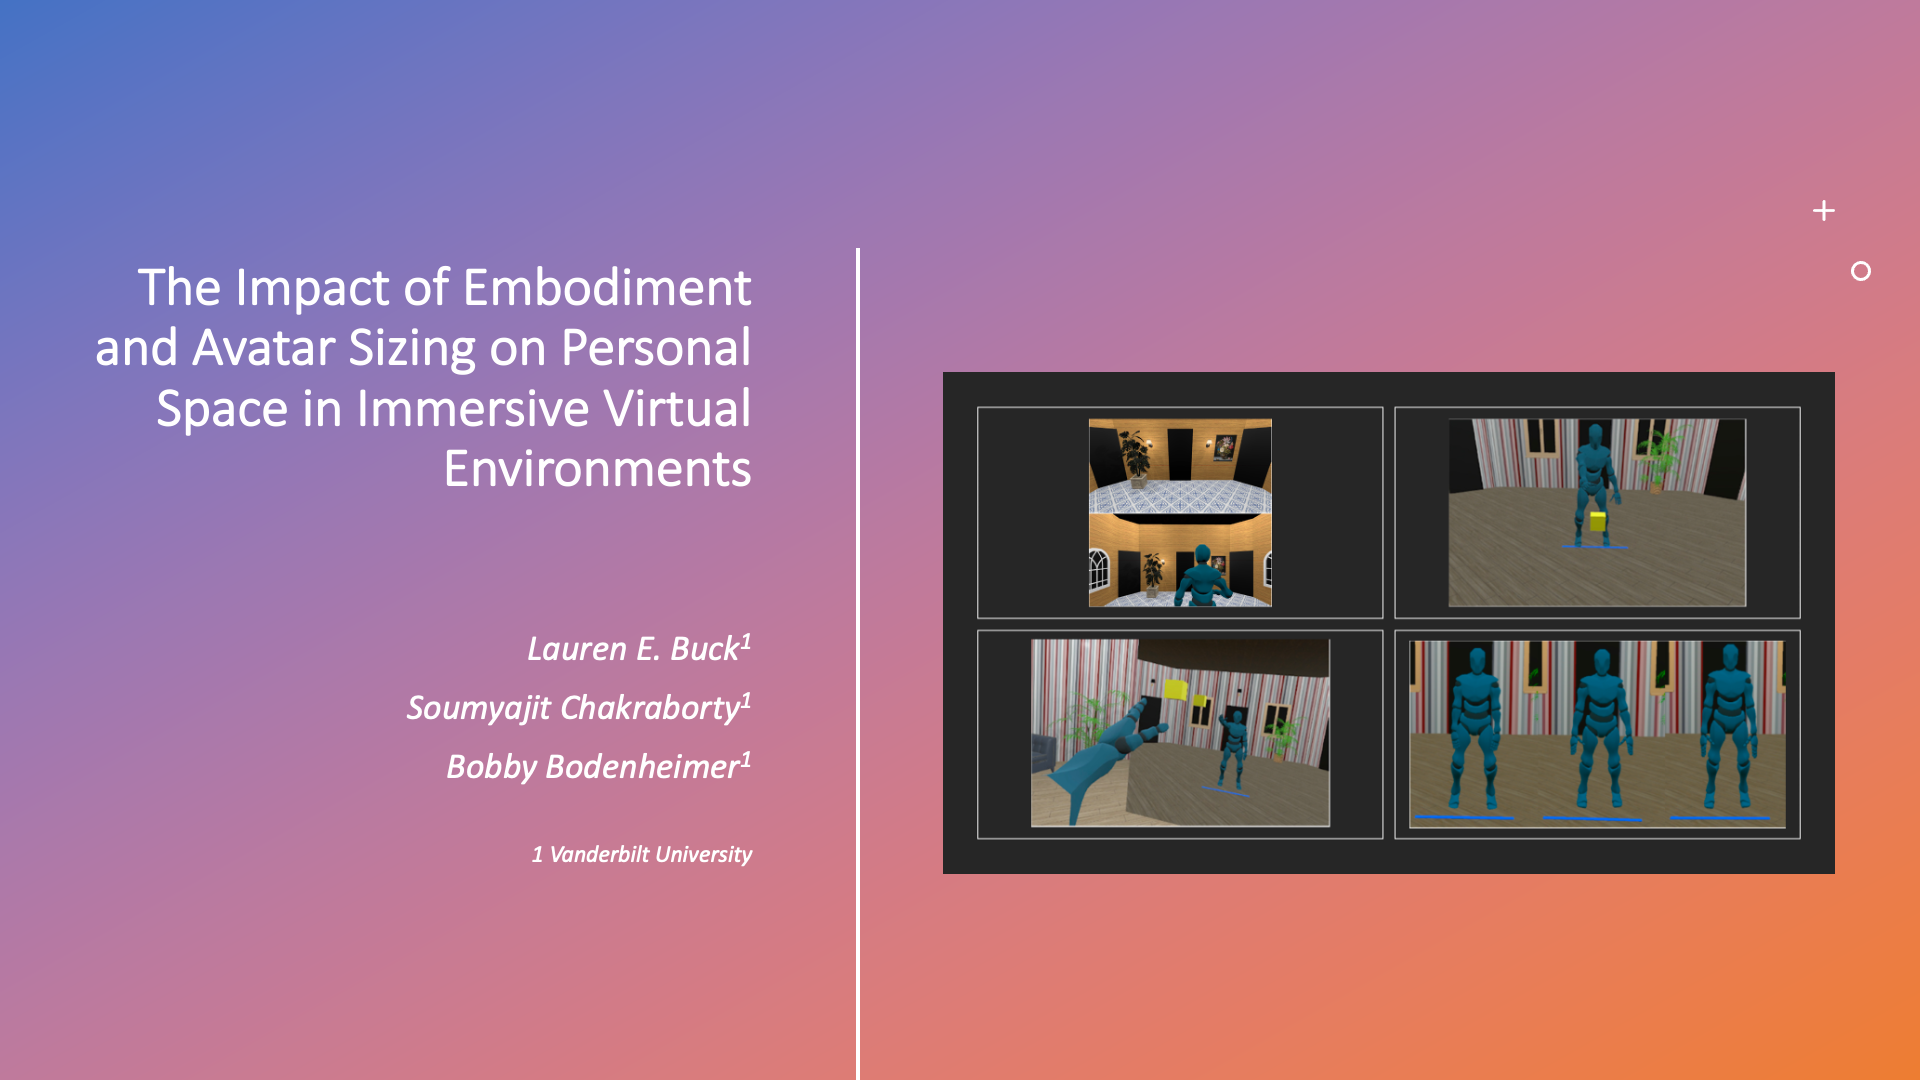 The Impact of Embodiment and Avatar Sizing on Personal Space in Immersive Virtual Environments